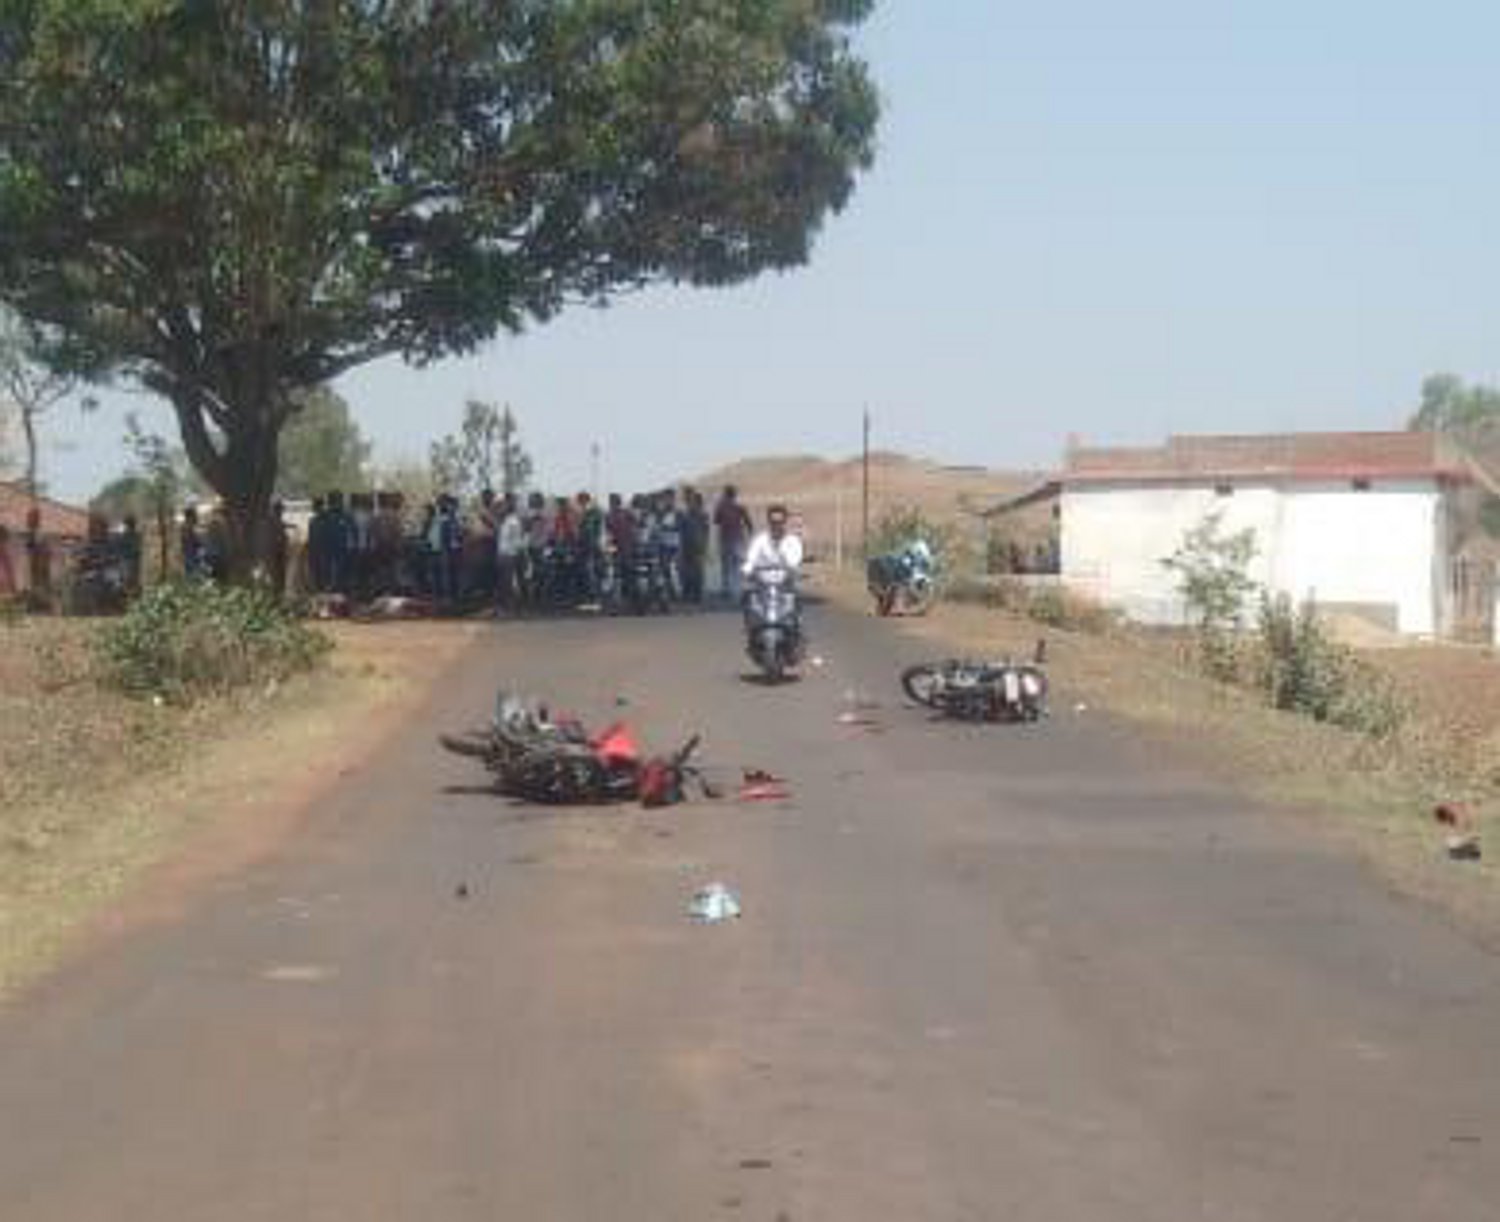 Two riders died in mutual conflicts of two bikes, one serious